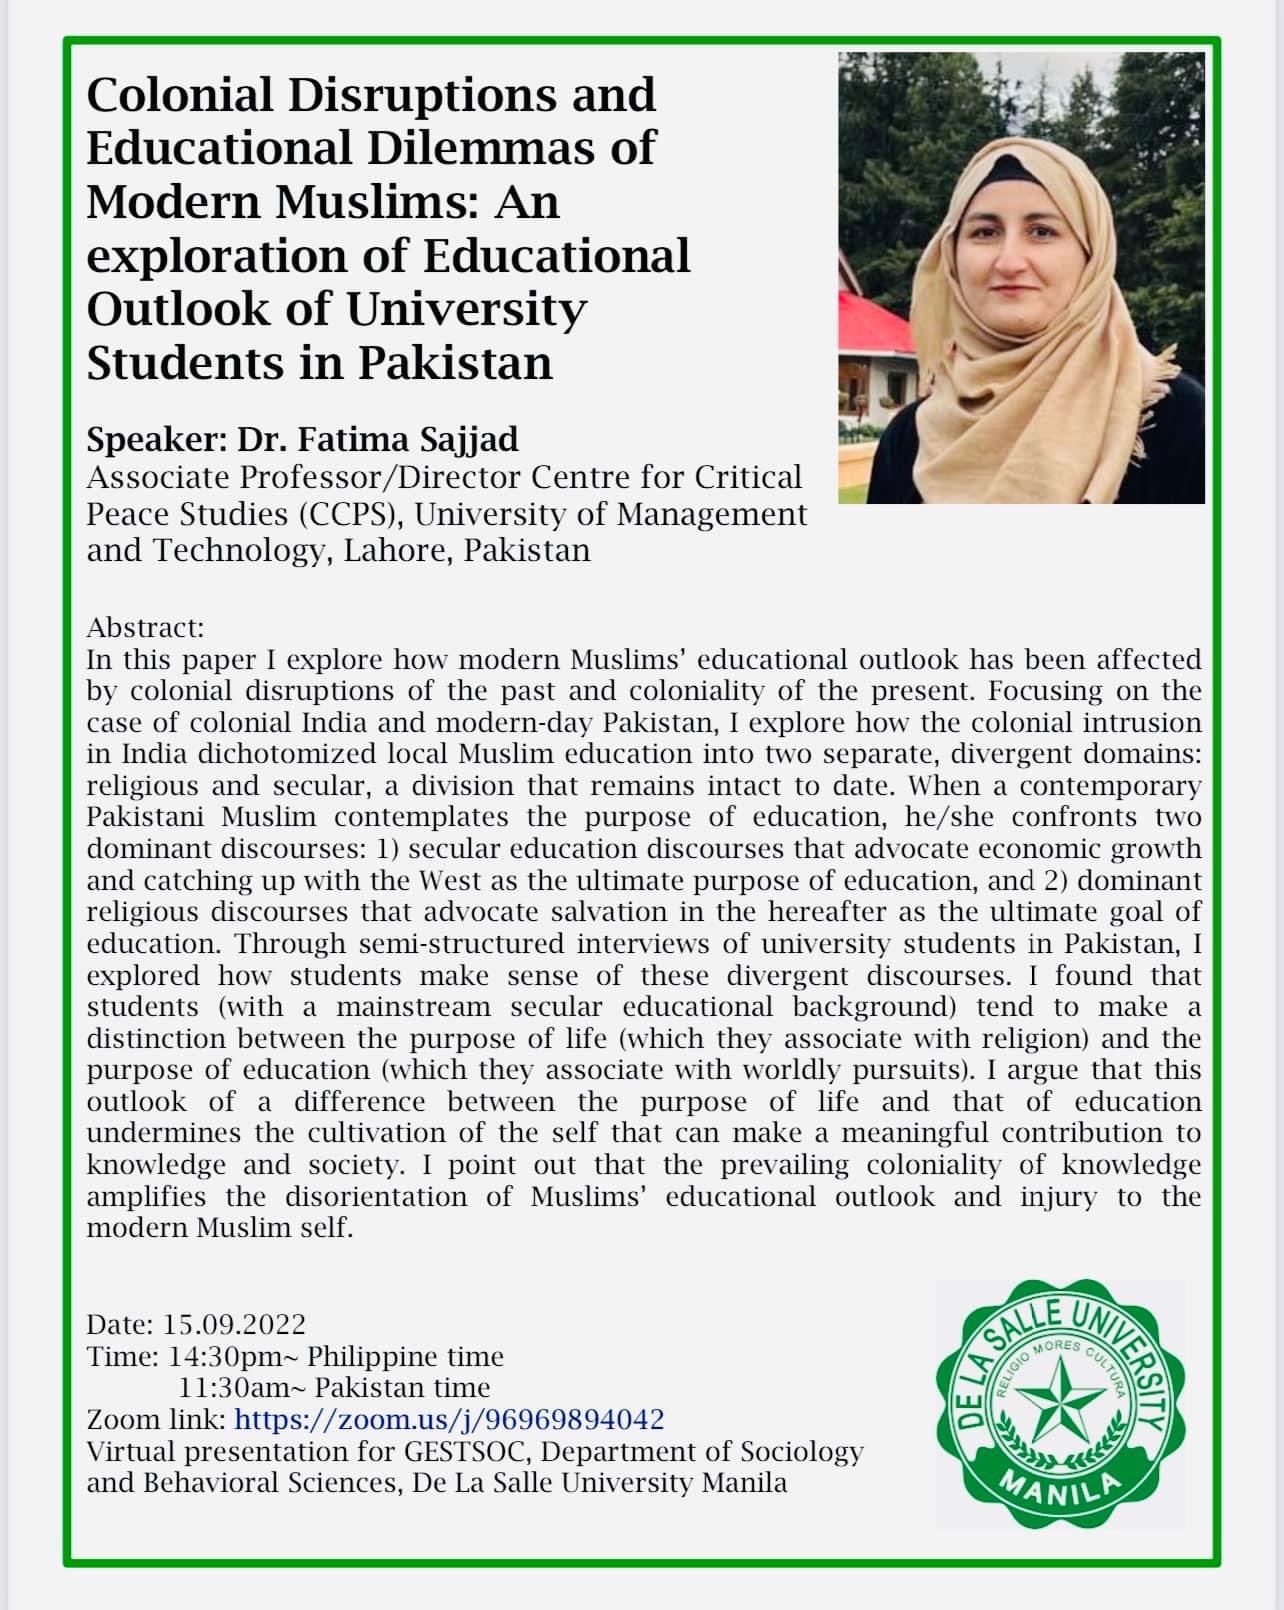 Director CCPS, Dr. Fatima Sajjad Presented her Research Paper on an Invitation from the Department of Sociology and Behavioral Sciences, De La Salle University, Manila.